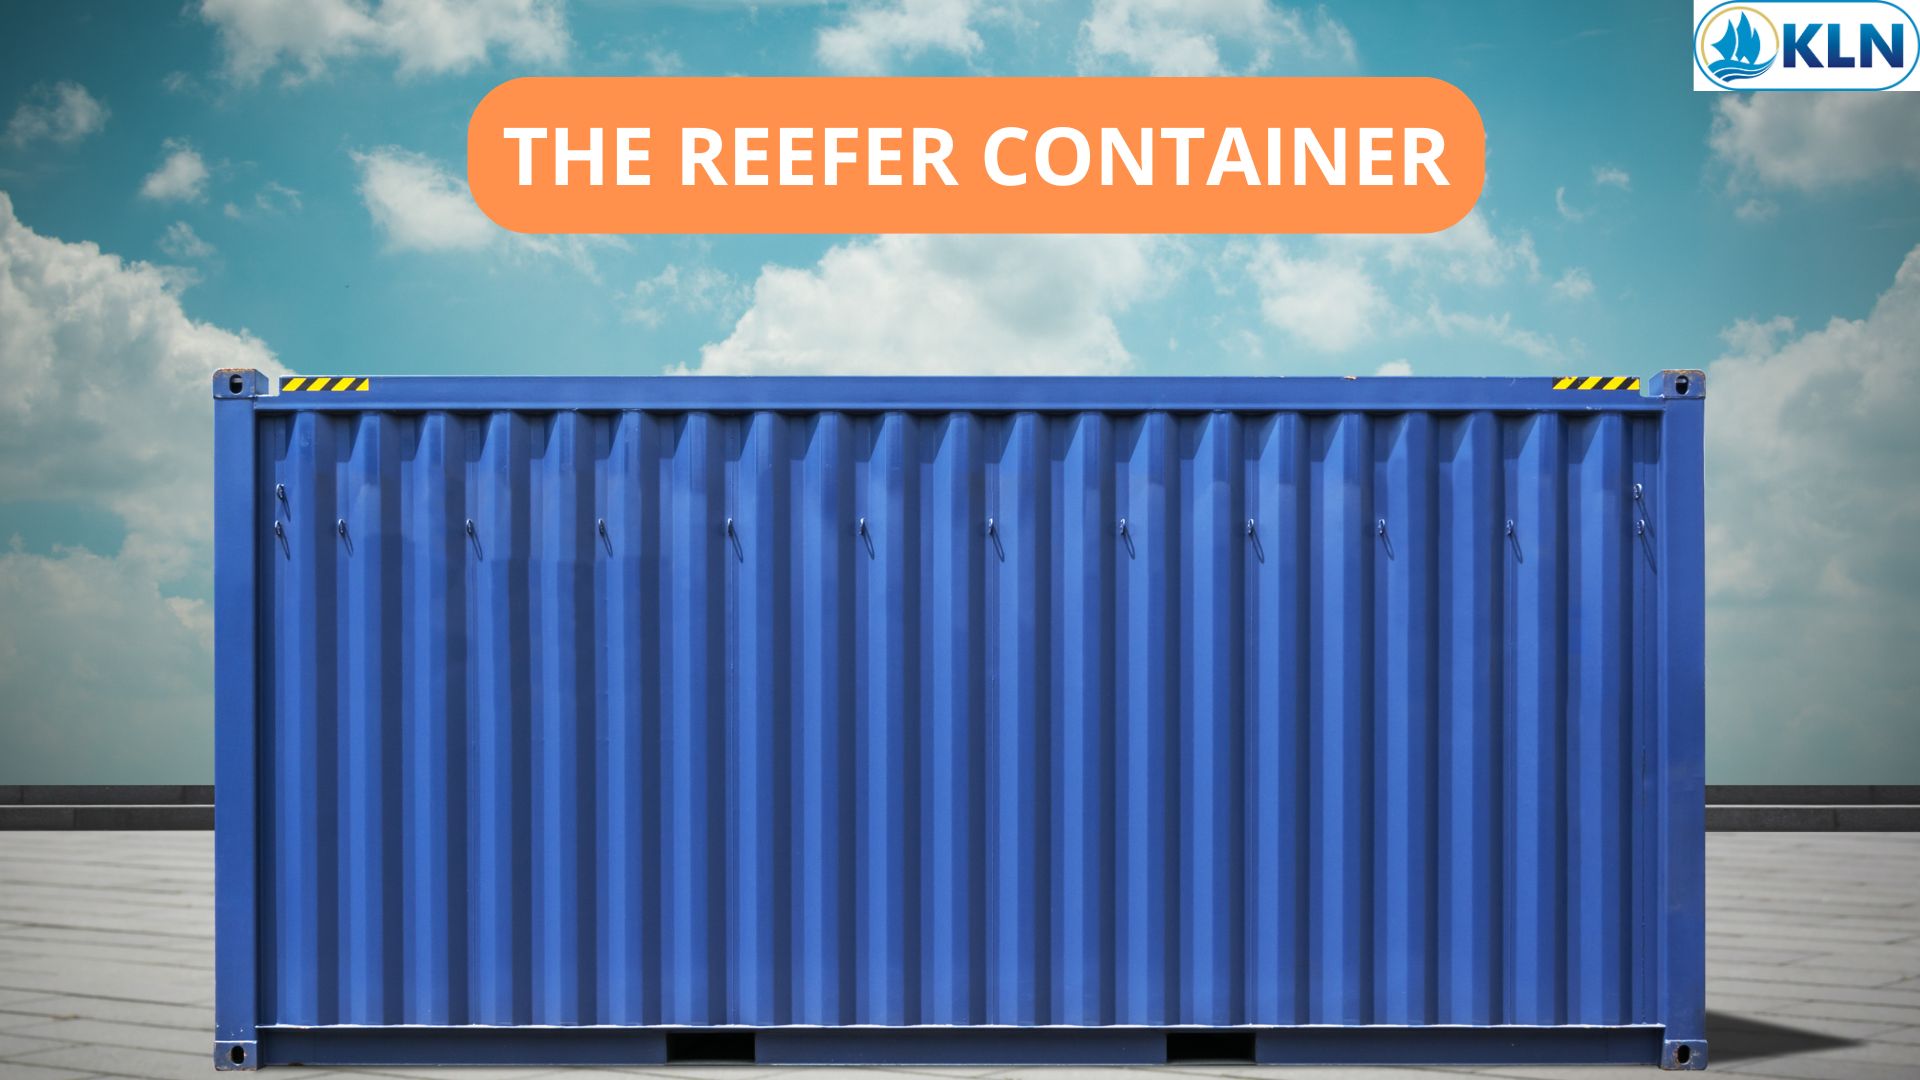 THE REEFER CONTAINER (Part 1)